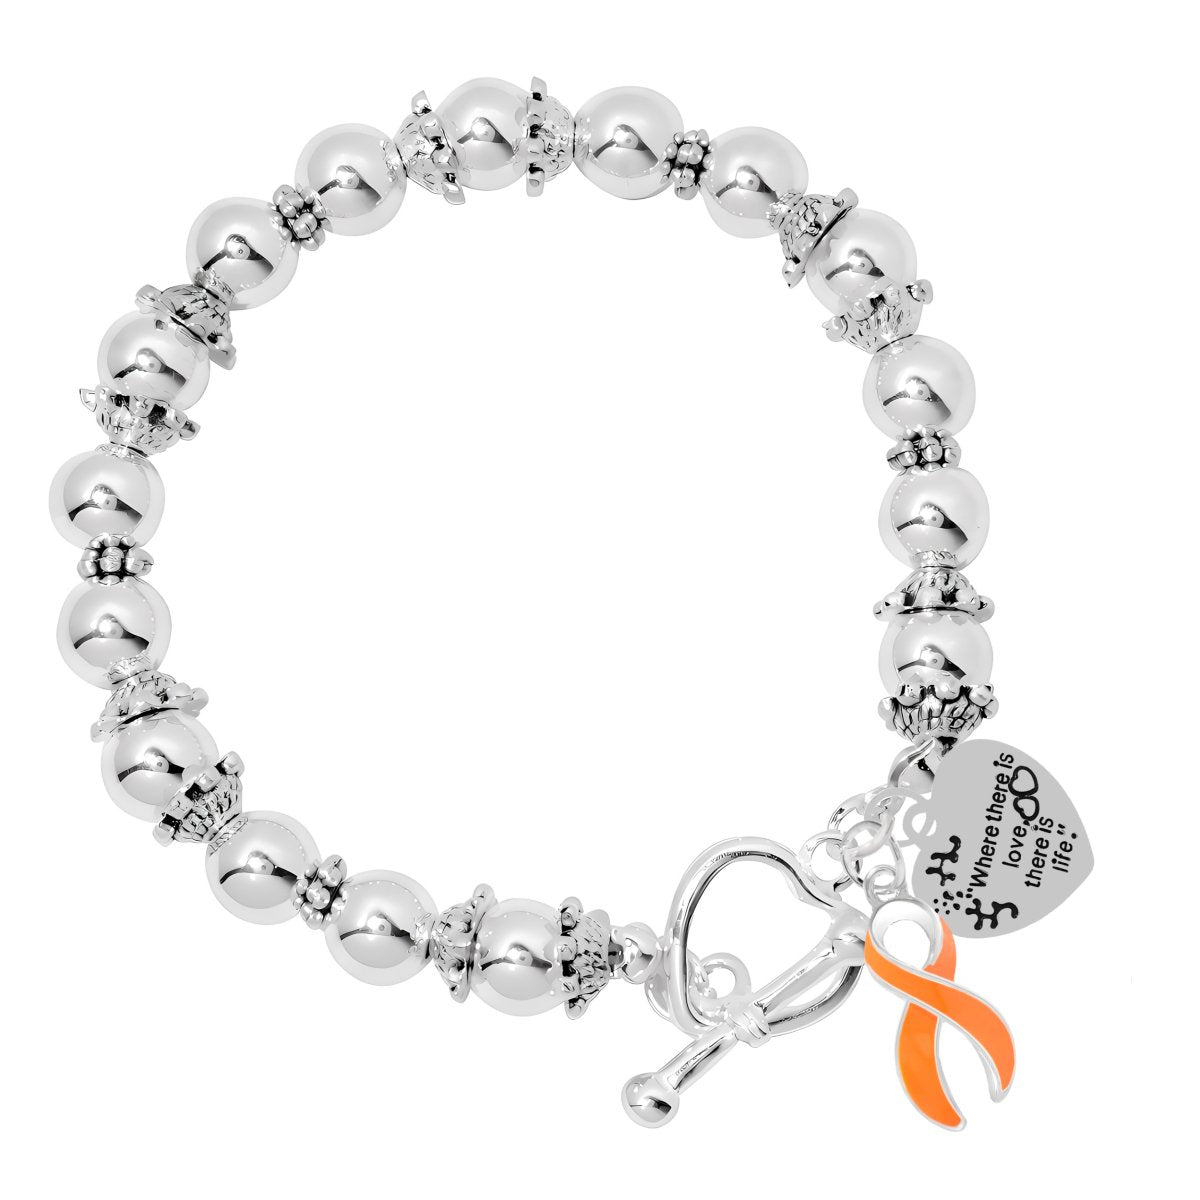 Where There is Love Kidney Cancer Ribbon Bracelets - Fundraising For A Cause